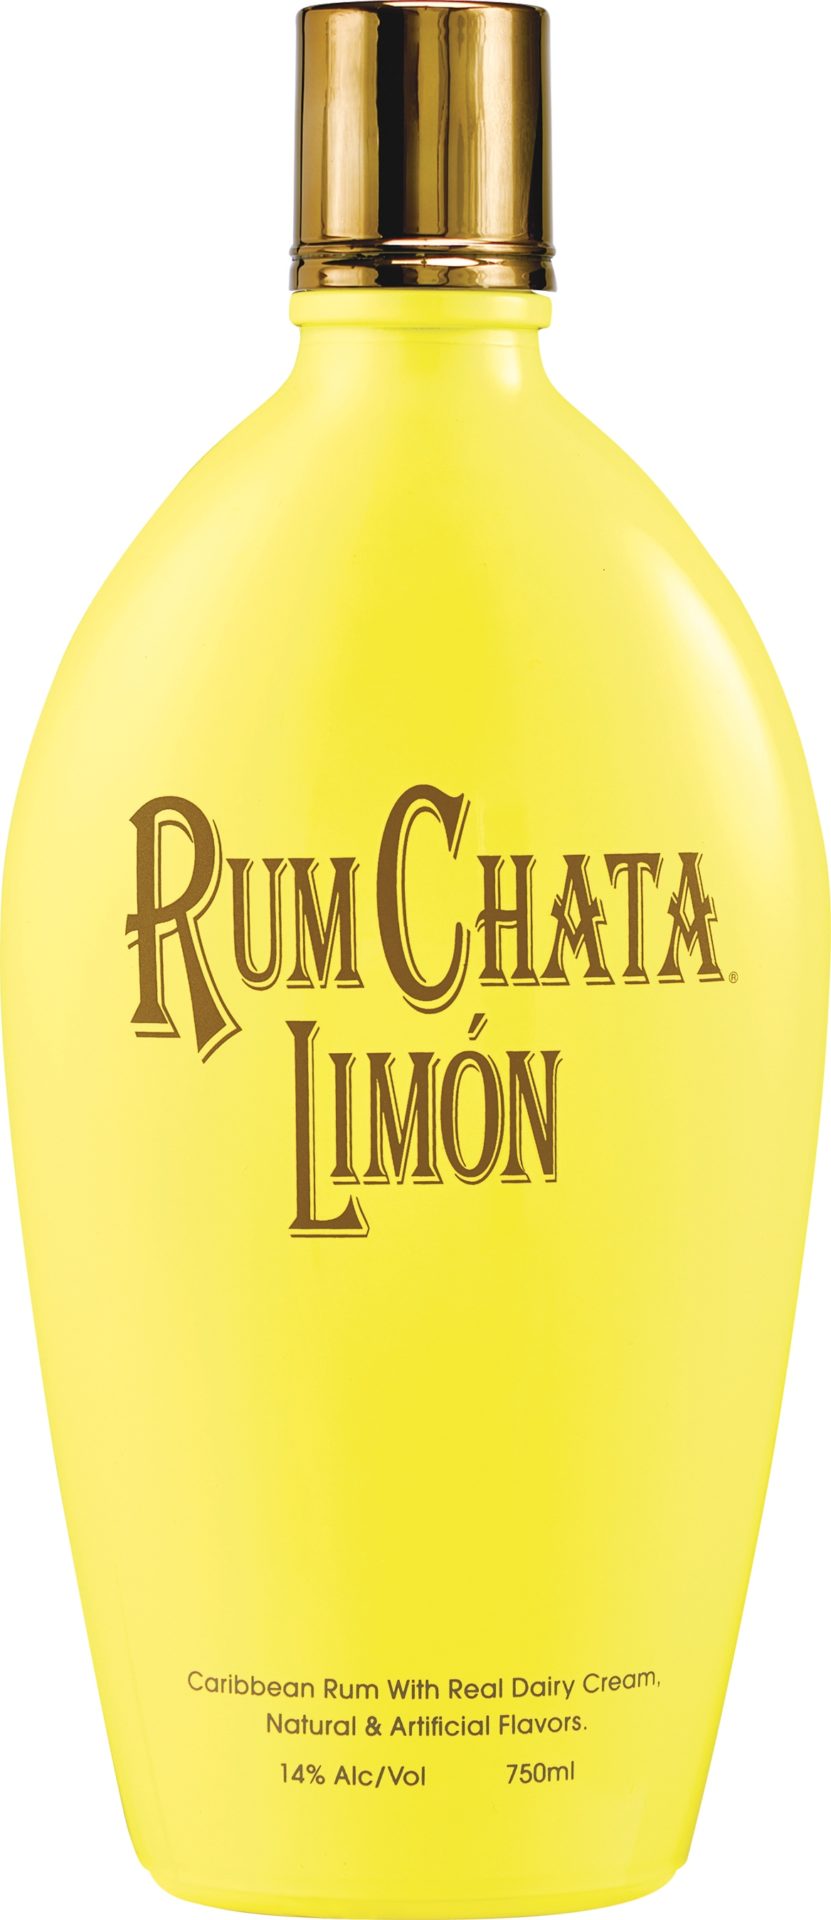 Introducing RumChata Limón - Just In Time For Summer | Spirited Magazine